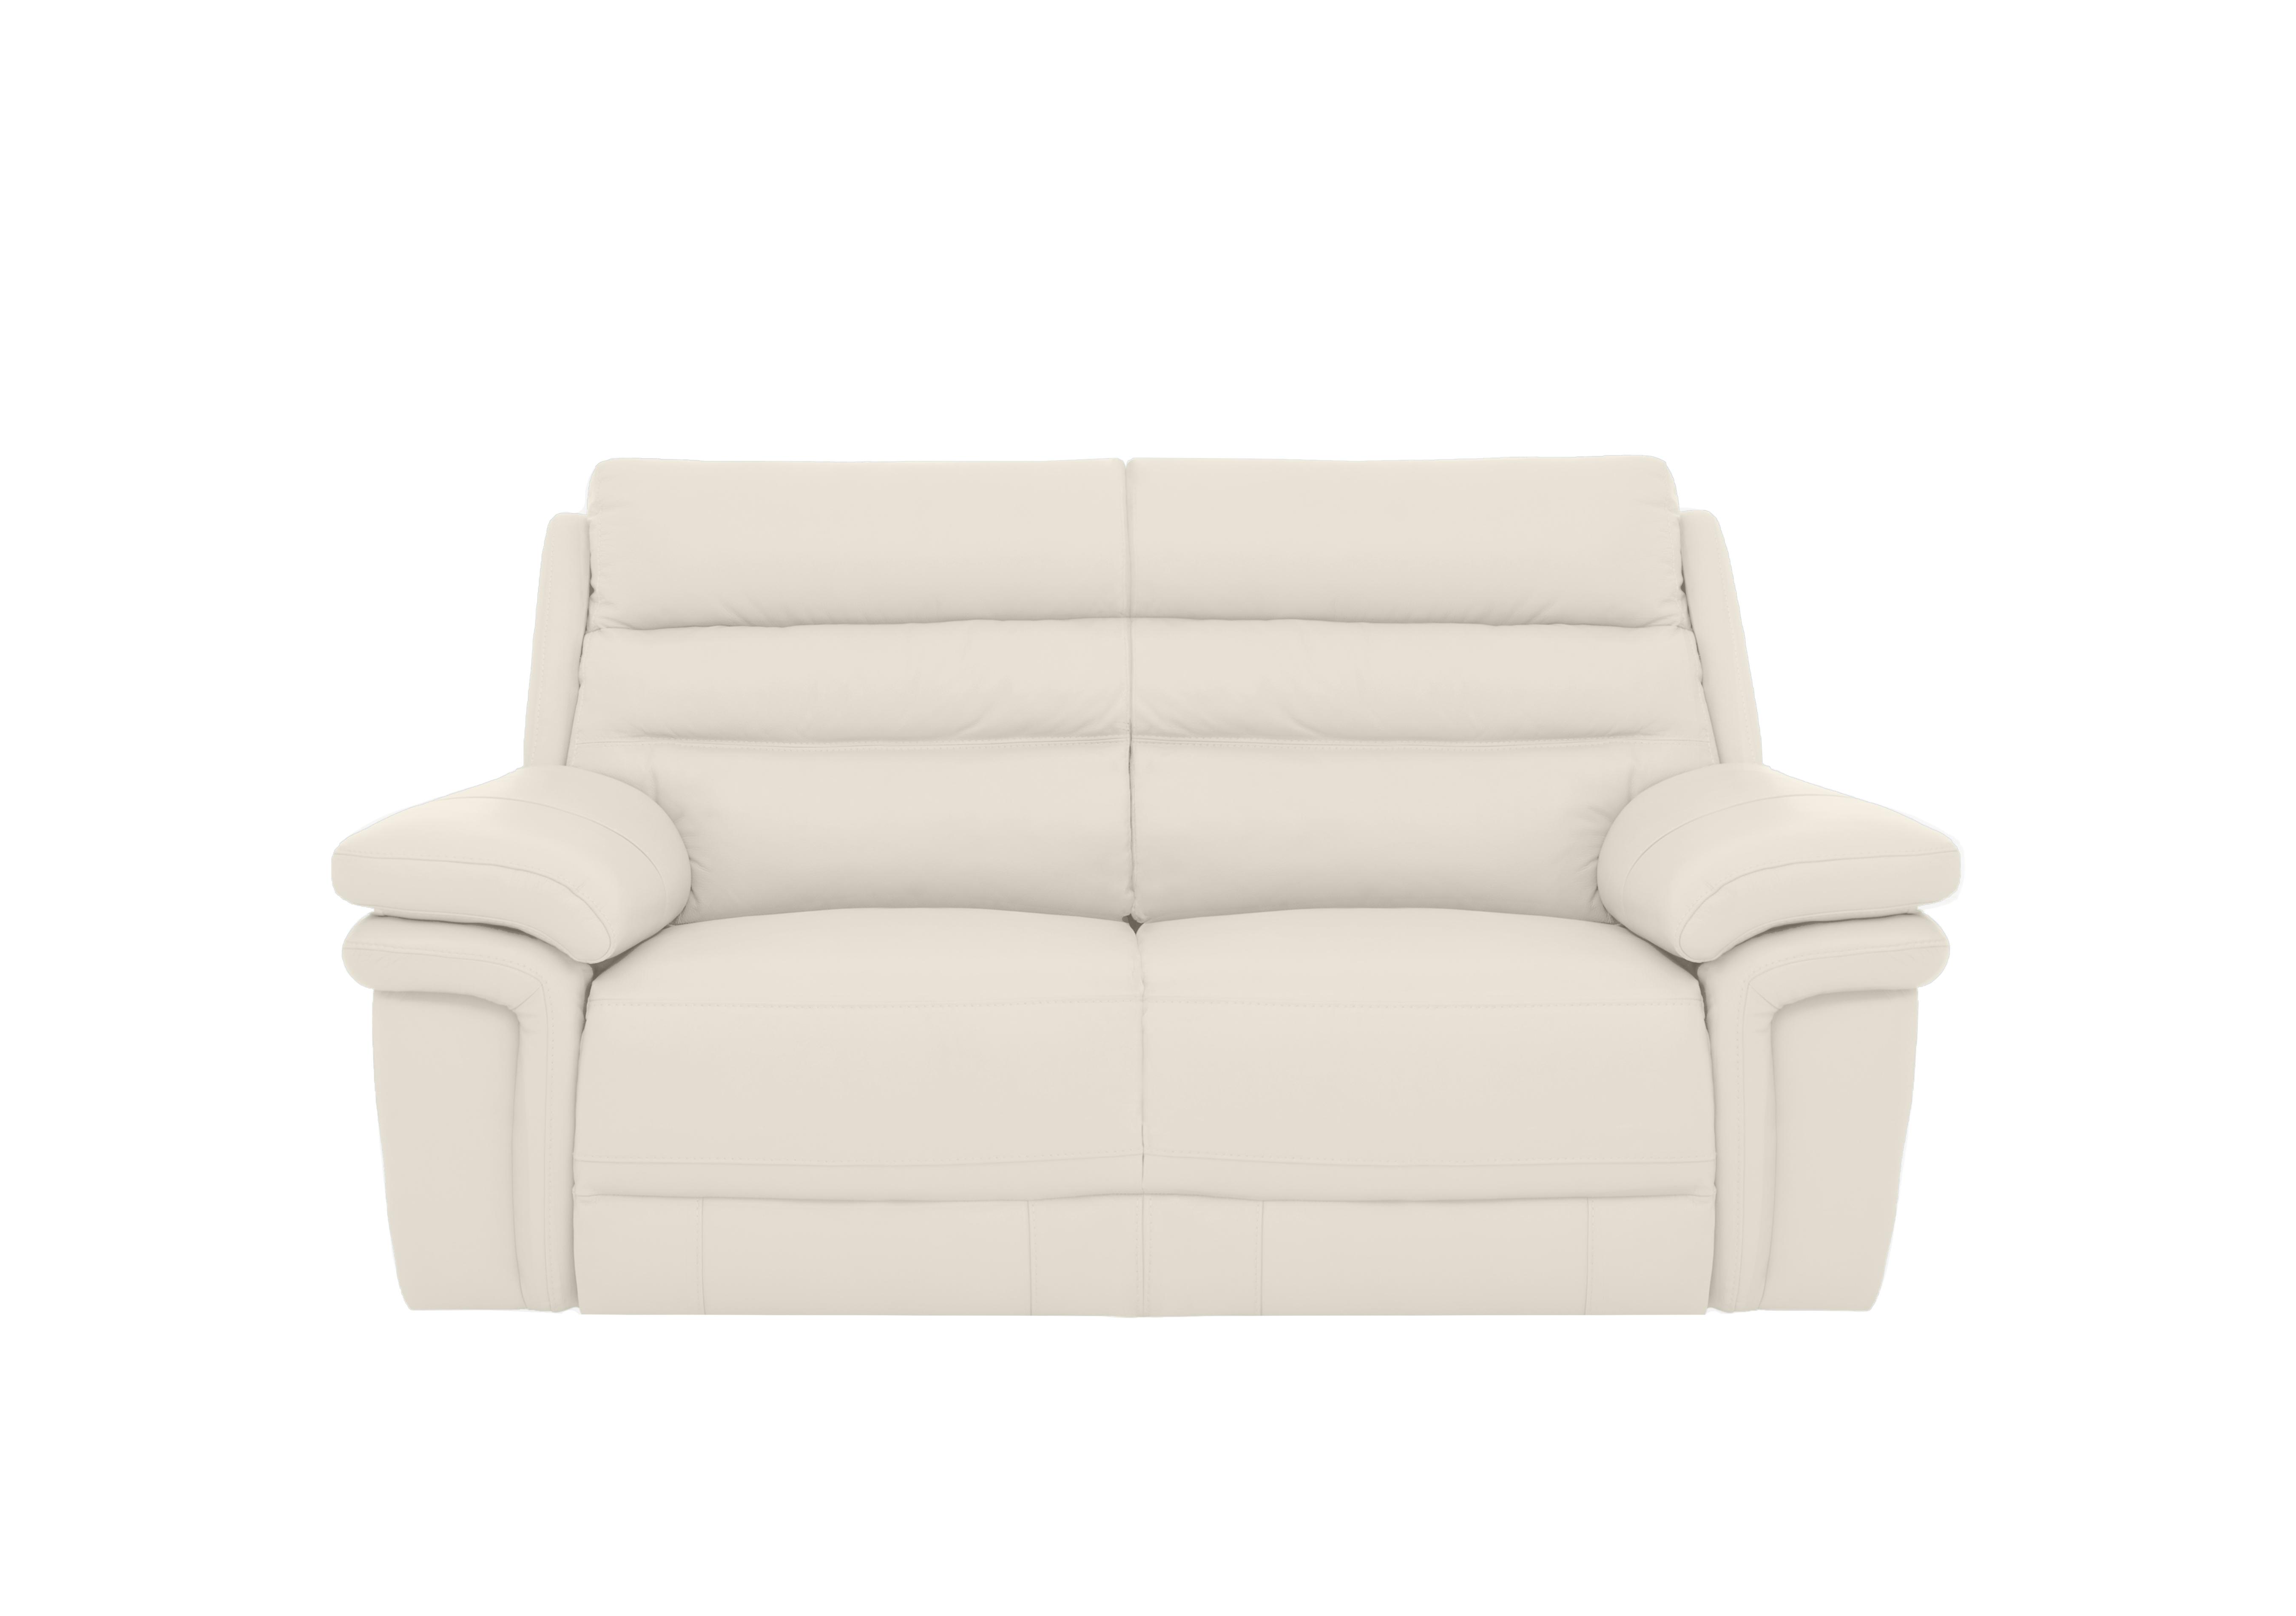 Berlin 2 Seater Leather Sofa in White Le-9307 on Furniture Village